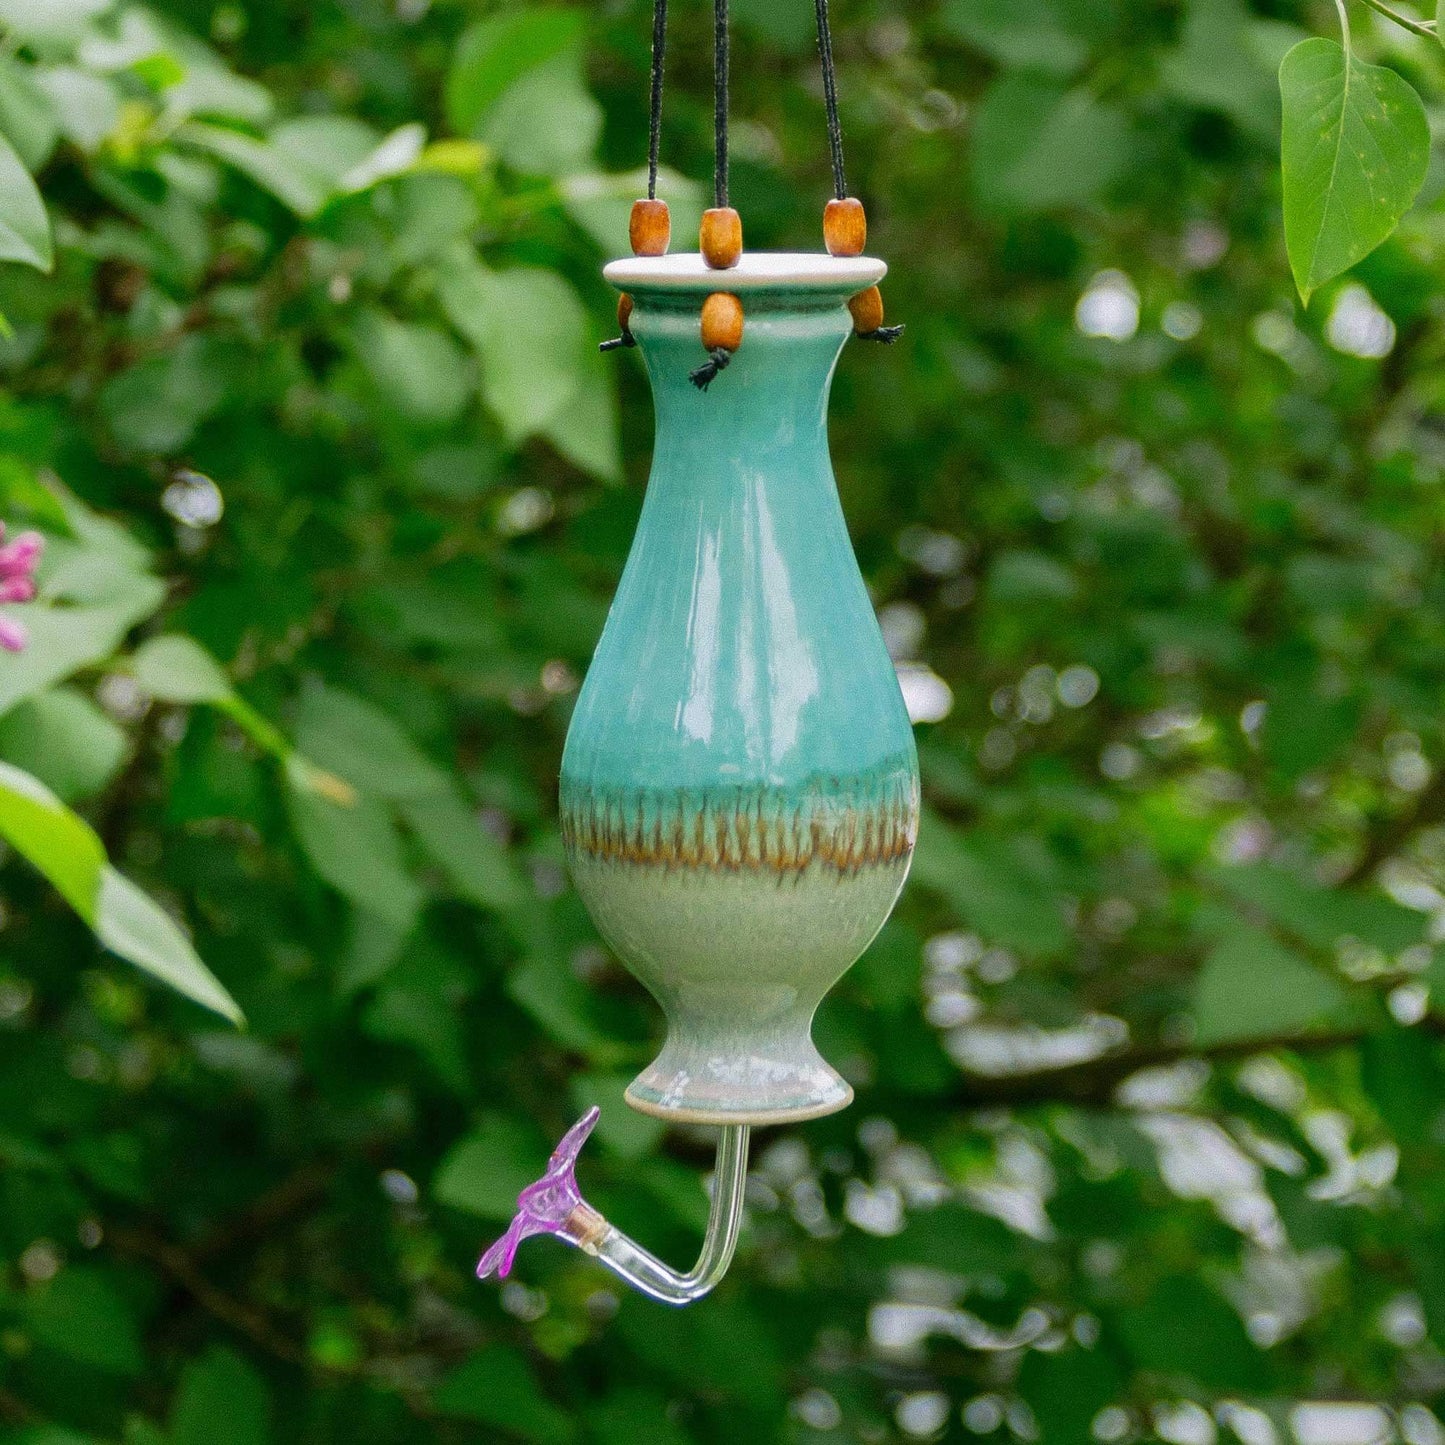 Handmade Pottery Bottle Hummingbird Feeder in Green Oribe pattern made by Georgetown Pottery in Maine